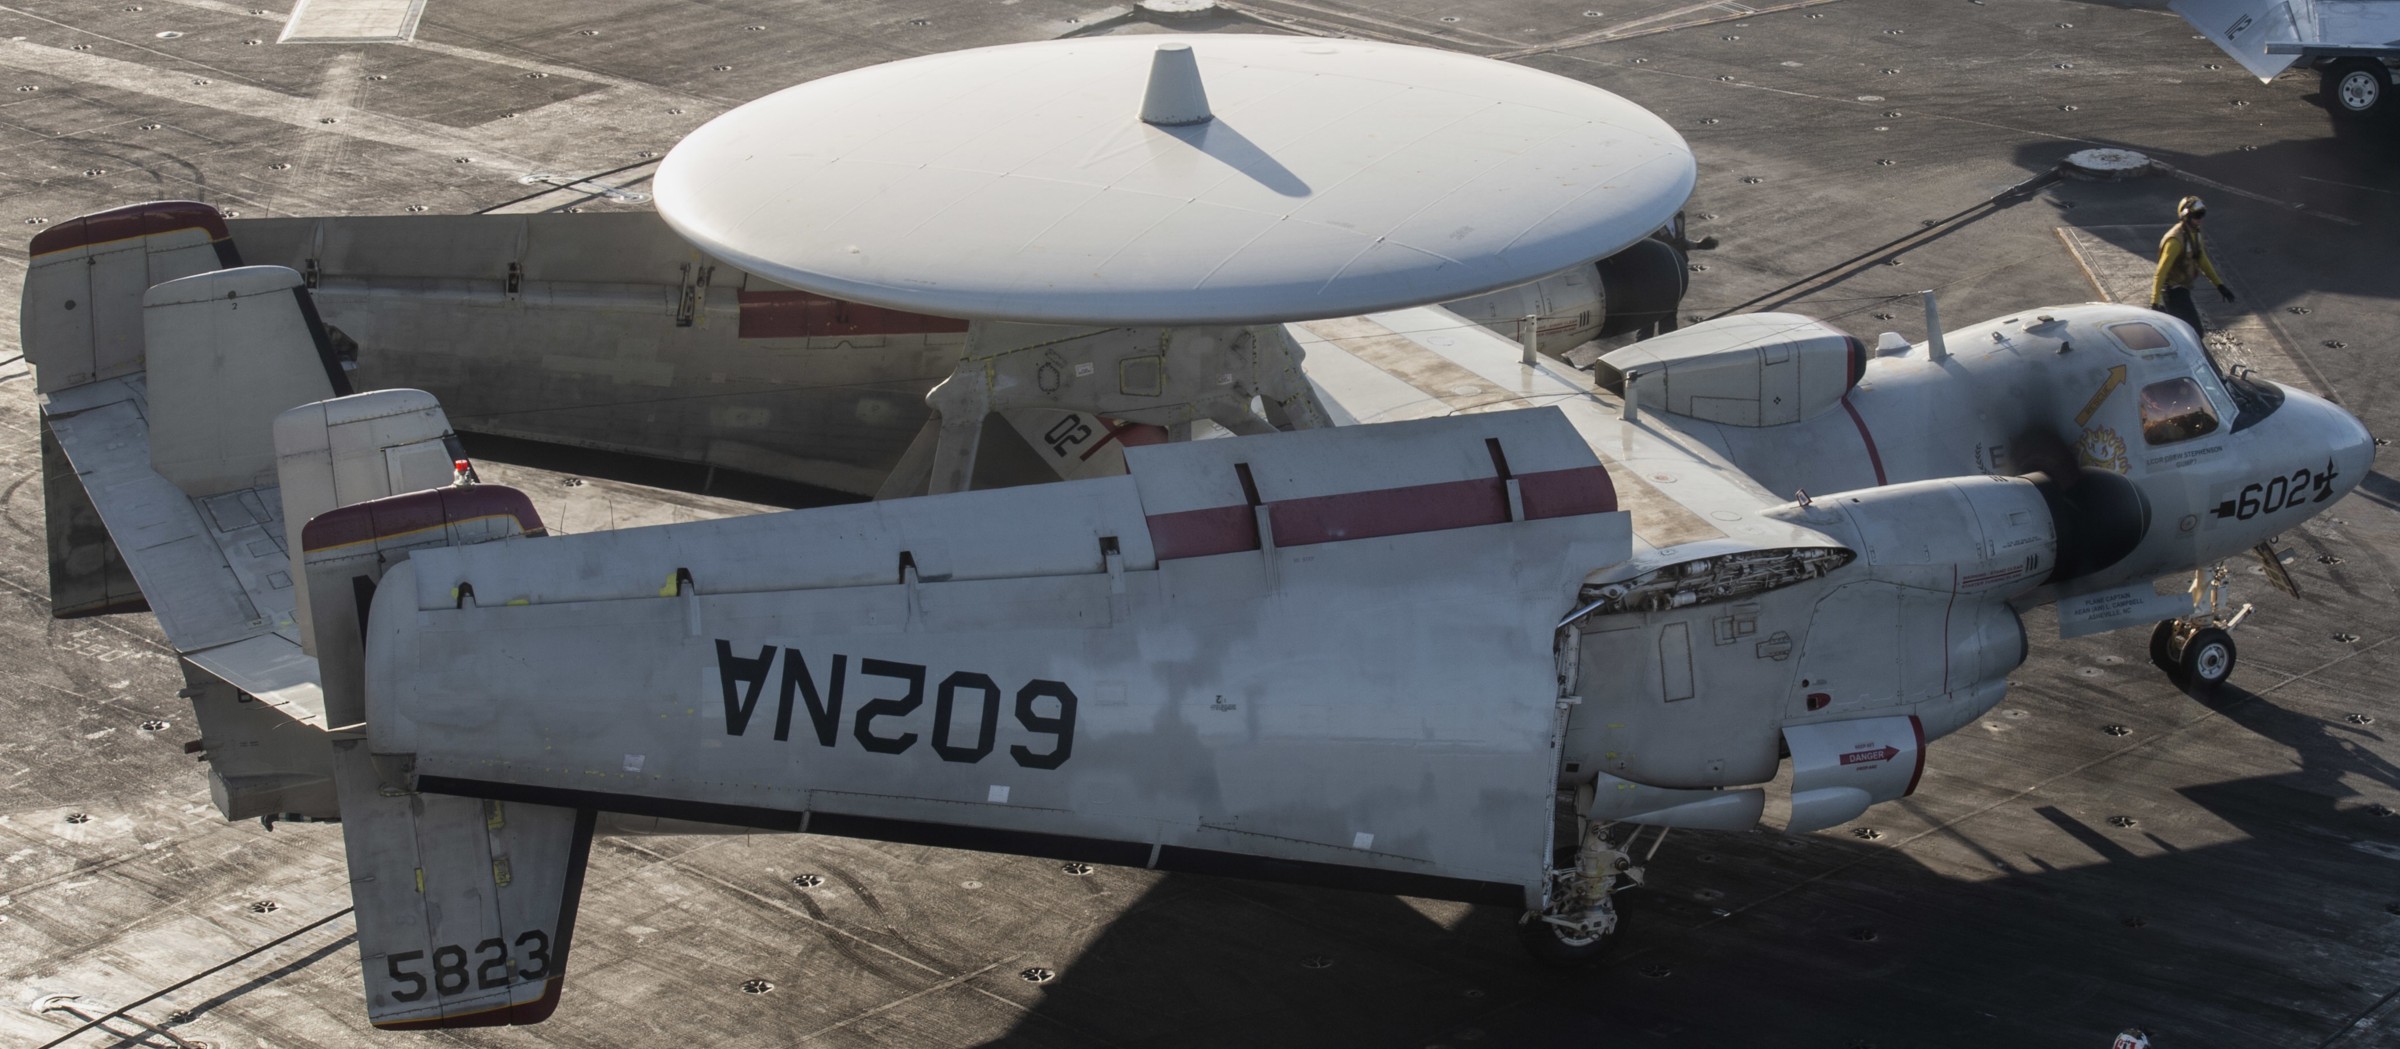 vaw-116 sun kings airborne command control squadron carrier early warning cvw-17 uss nimitz cvn-68 102